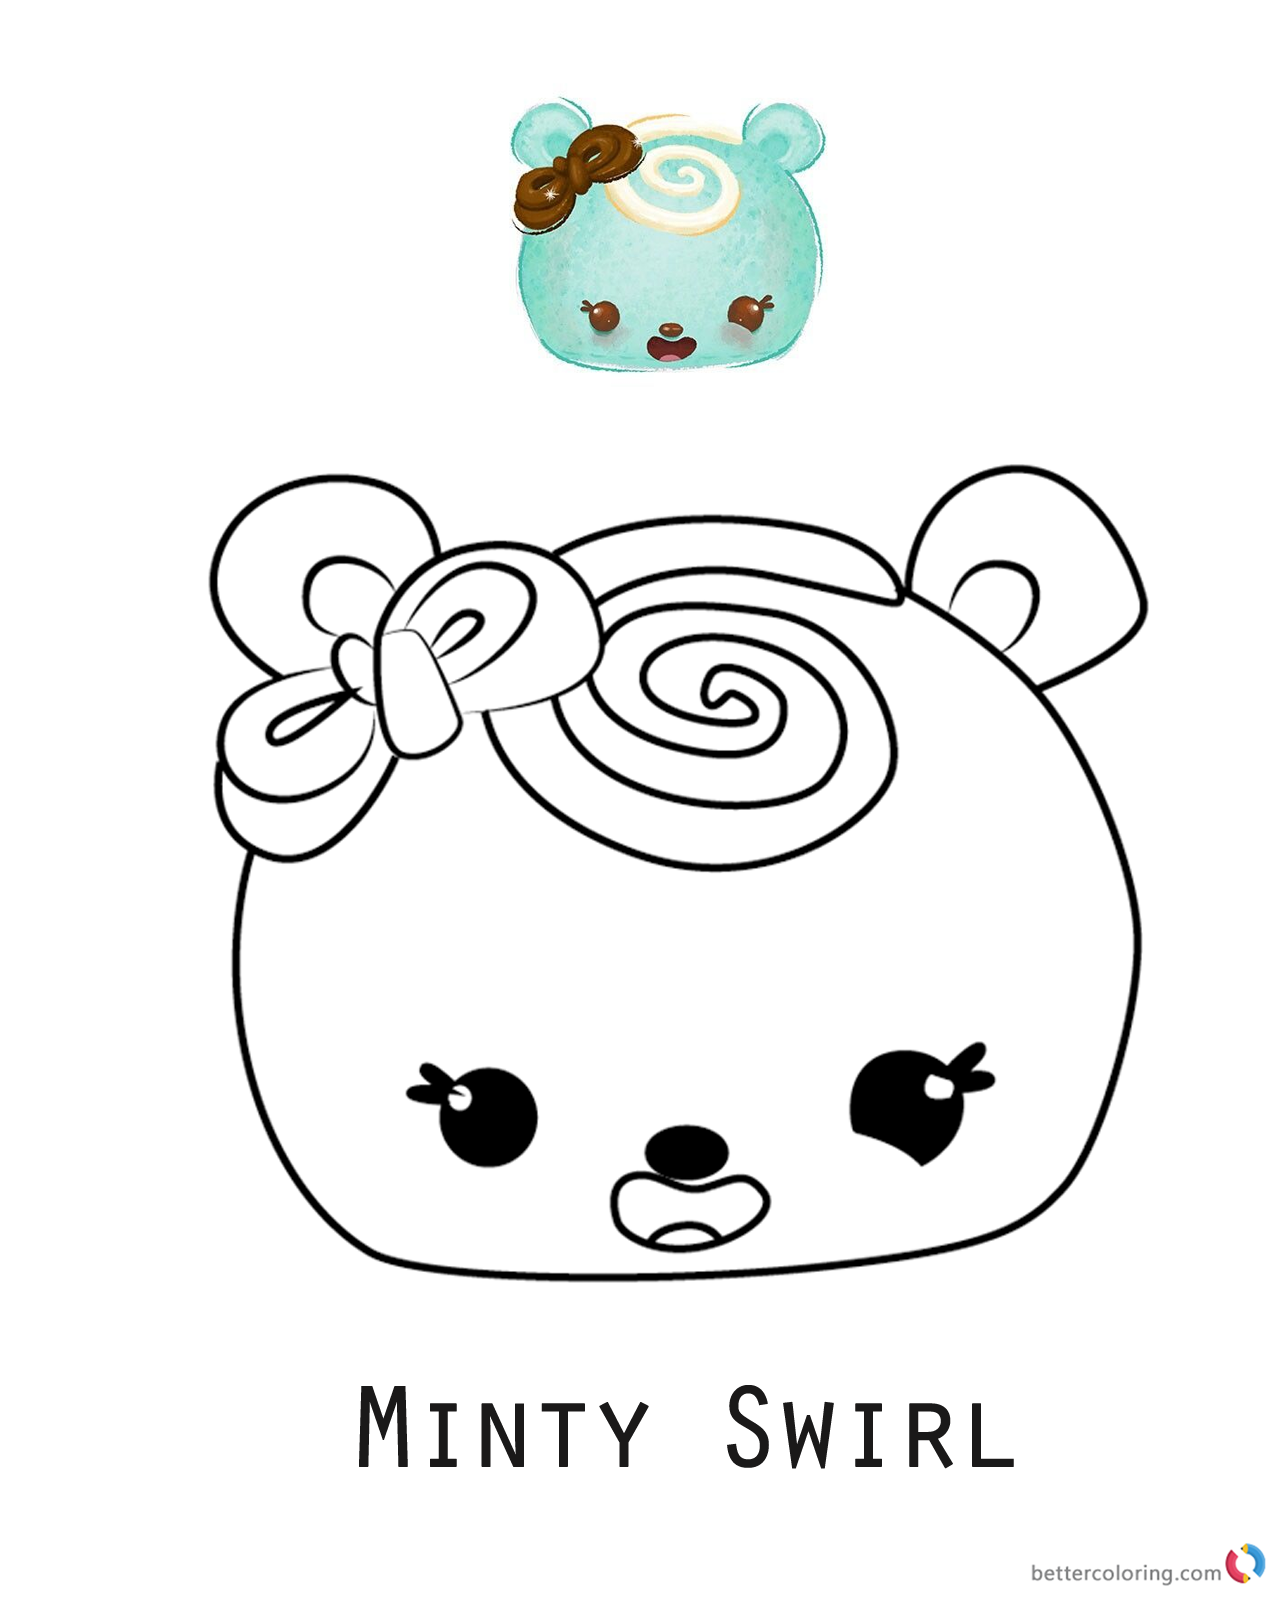 Download Num Noms Coloring Sheet Minty Swirl - Free Printable Coloring Pages